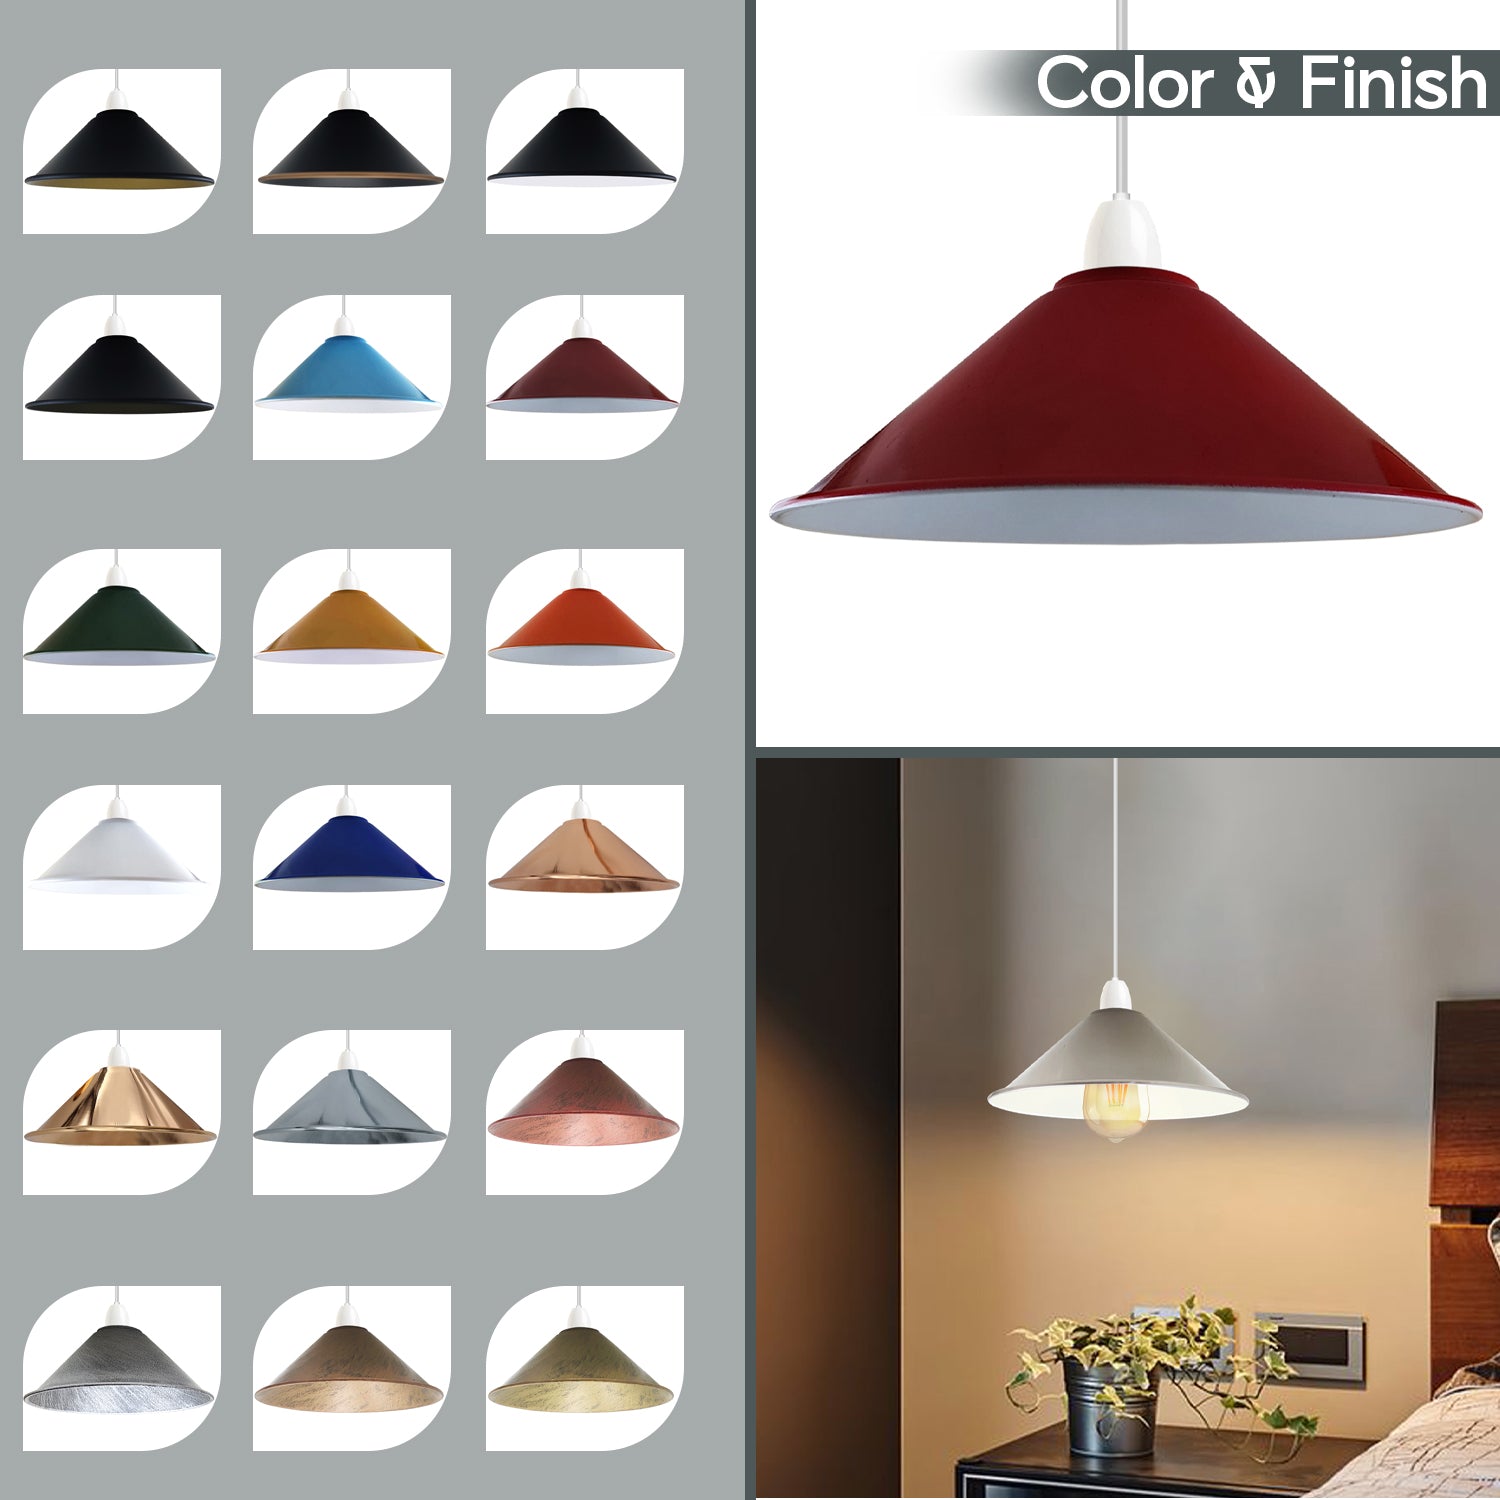 Vintage inspired lighting ideas and Cone lamp shades